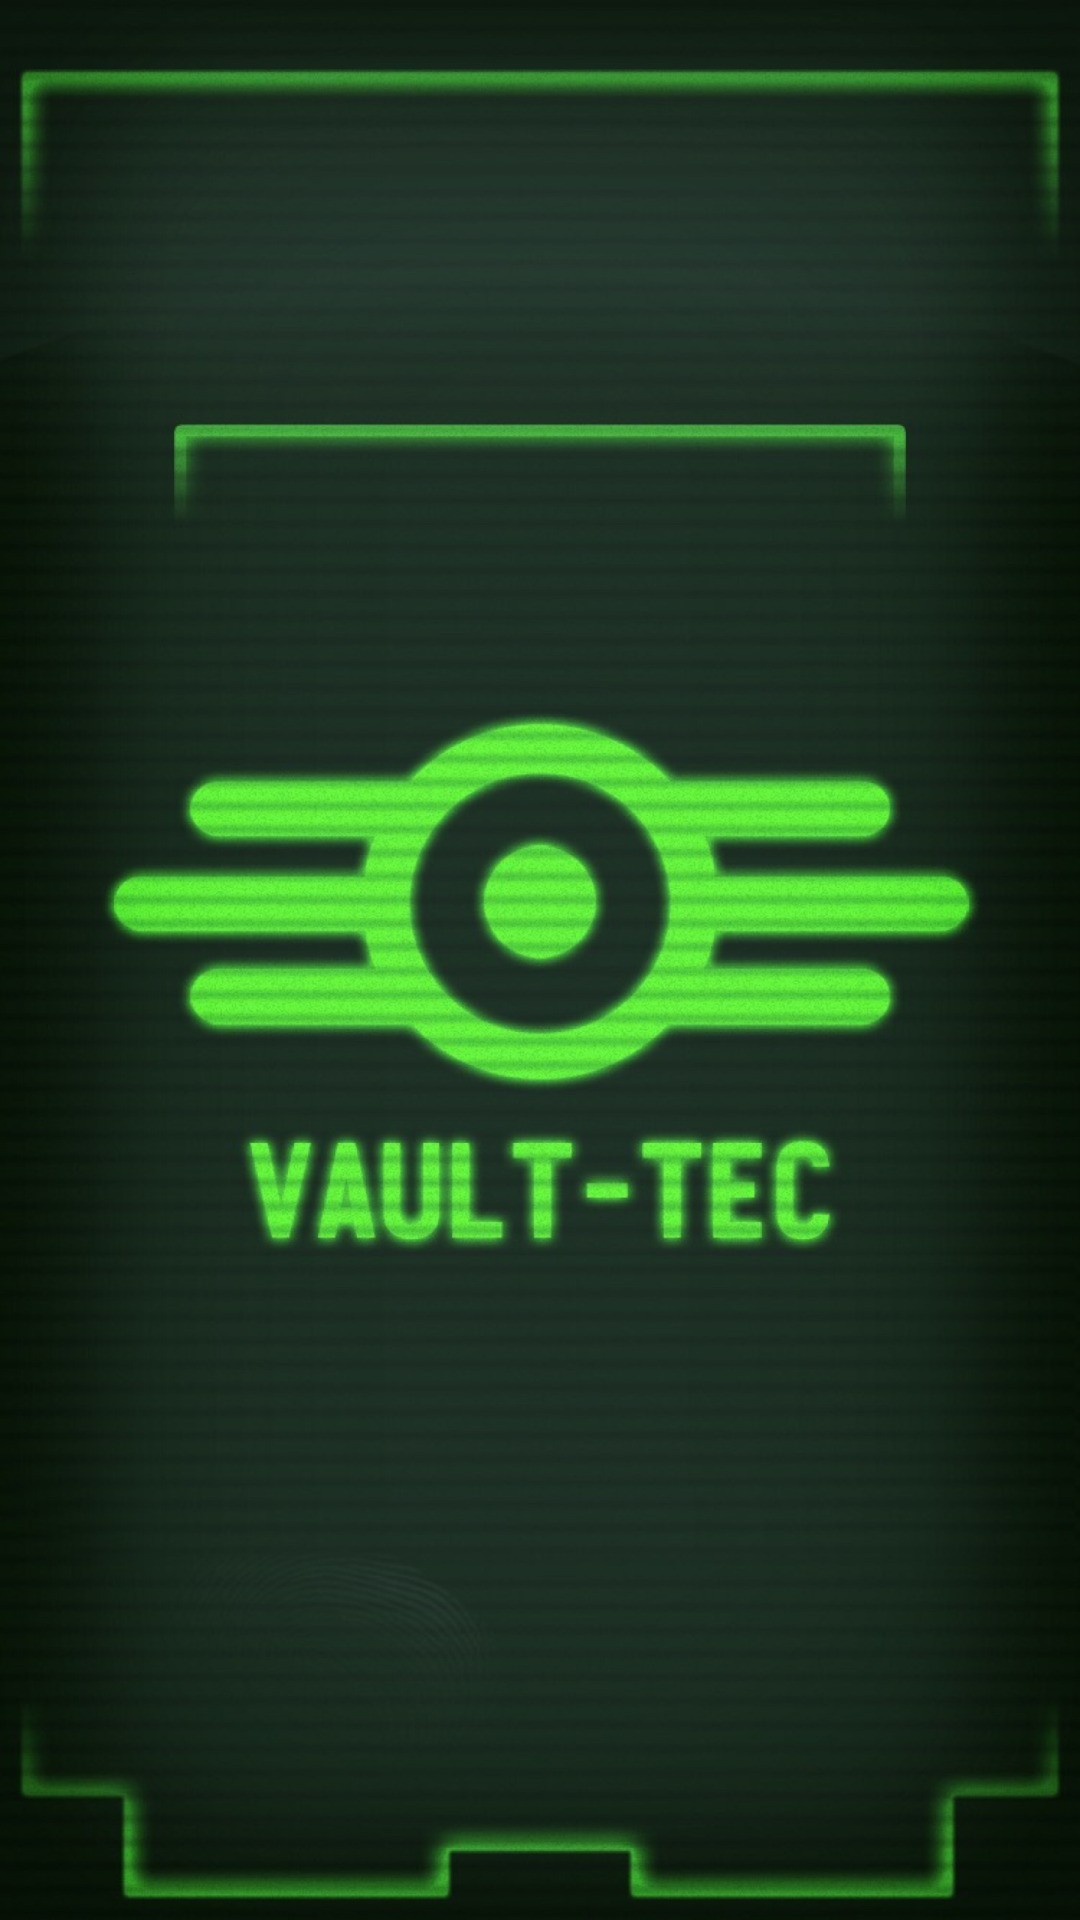 Fallout 4 phone wallpaper ·① Download free High Resolution backgrounds